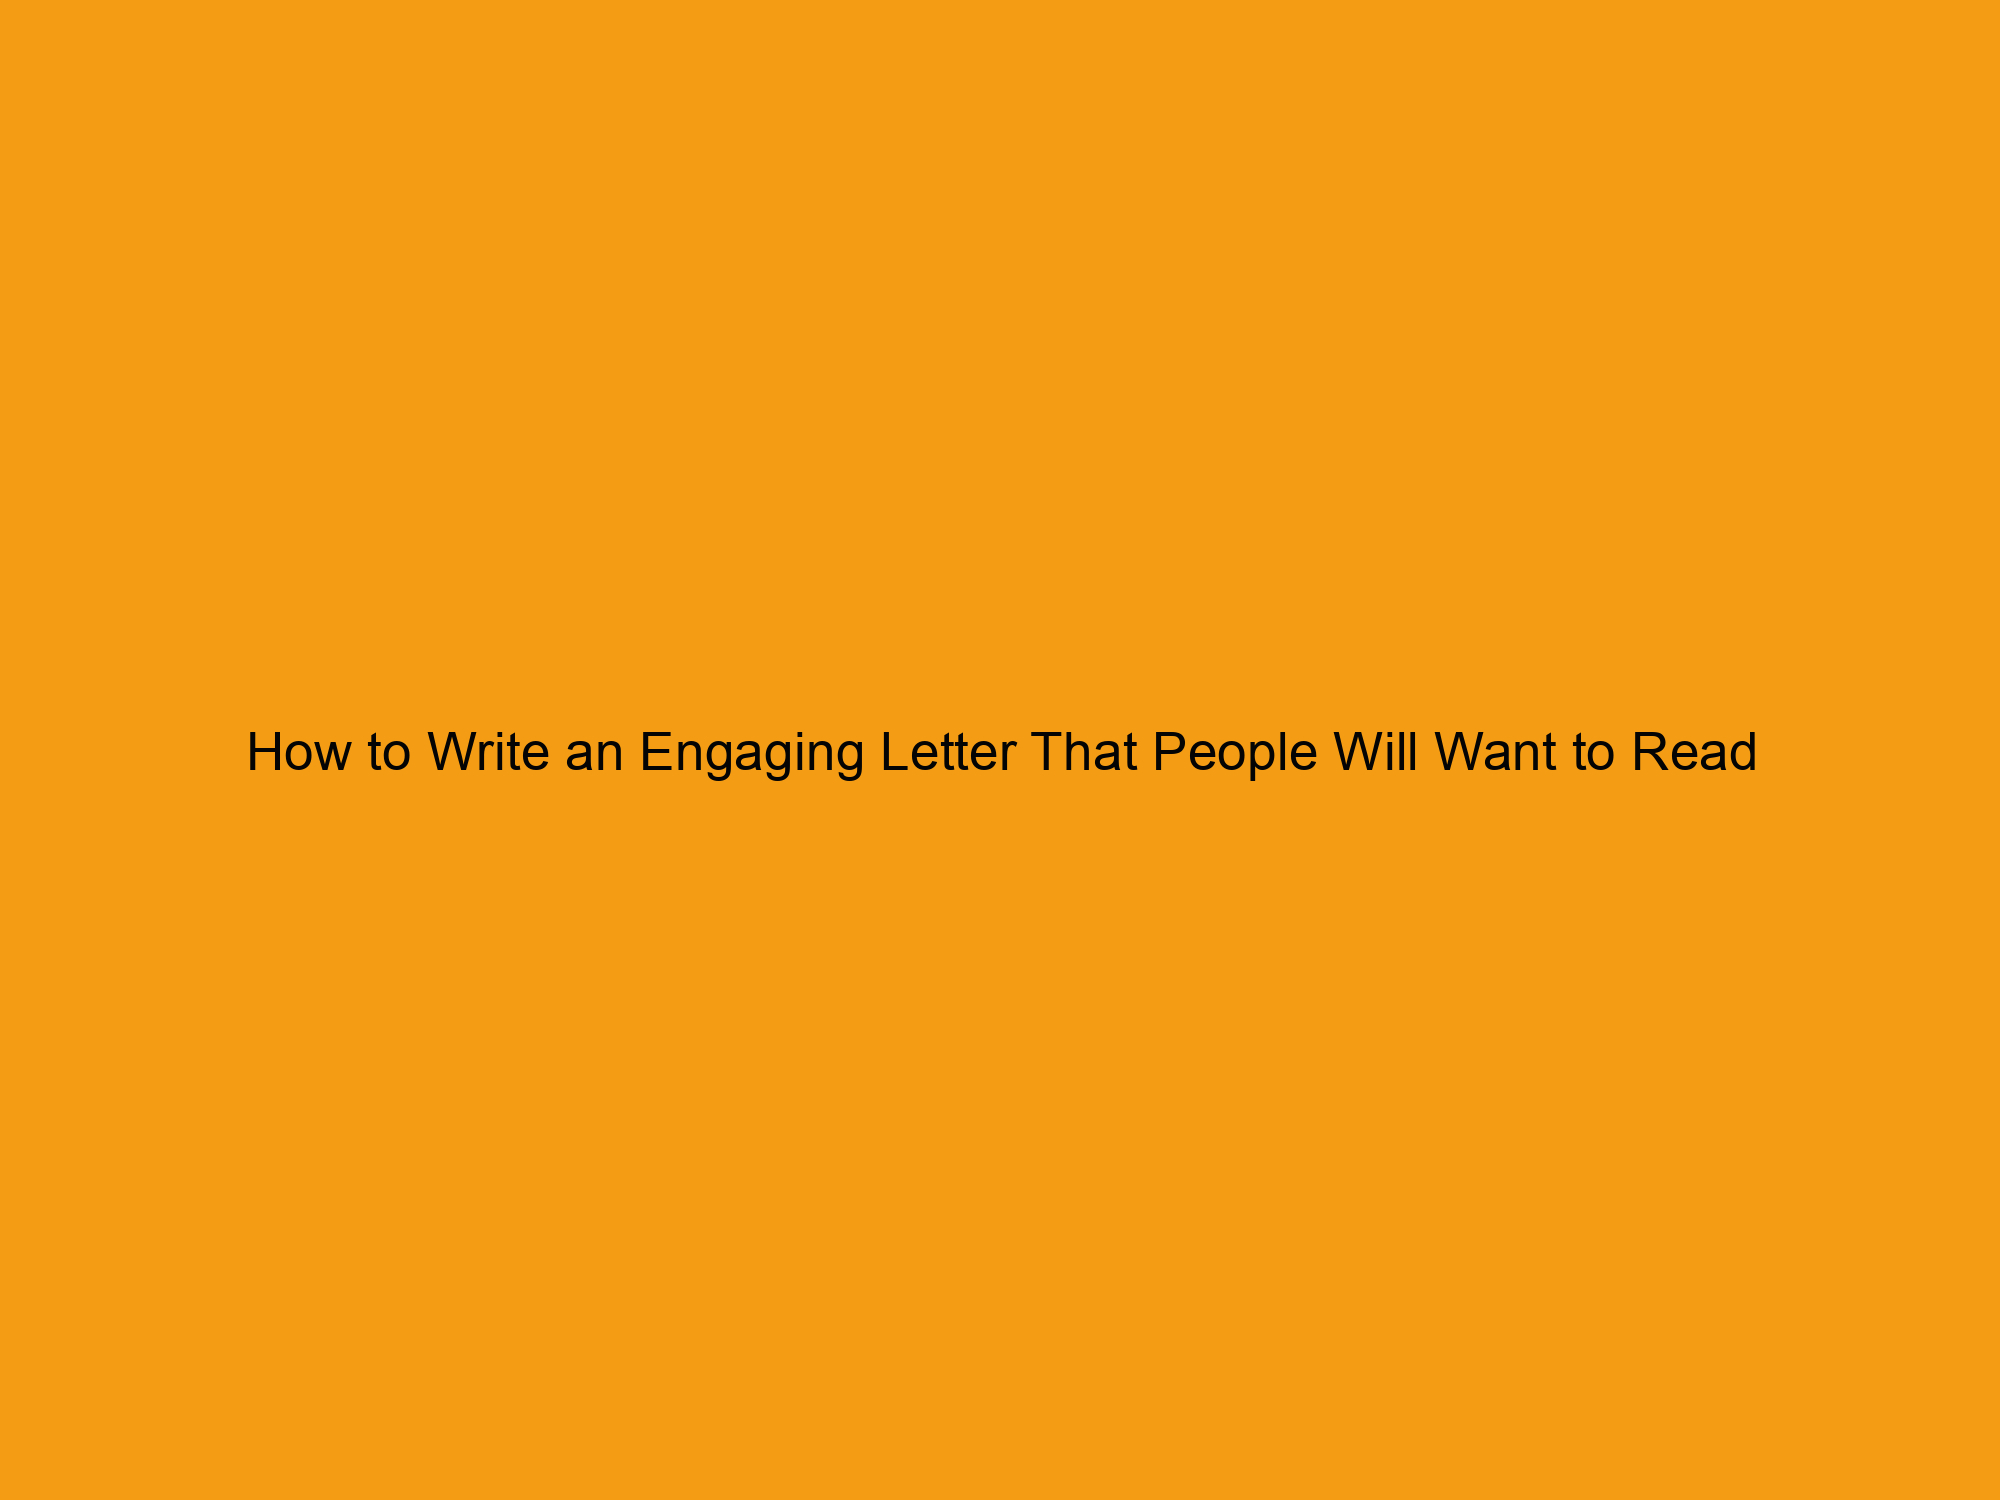 How to Write an Engaging Letter That People Will Want to Read